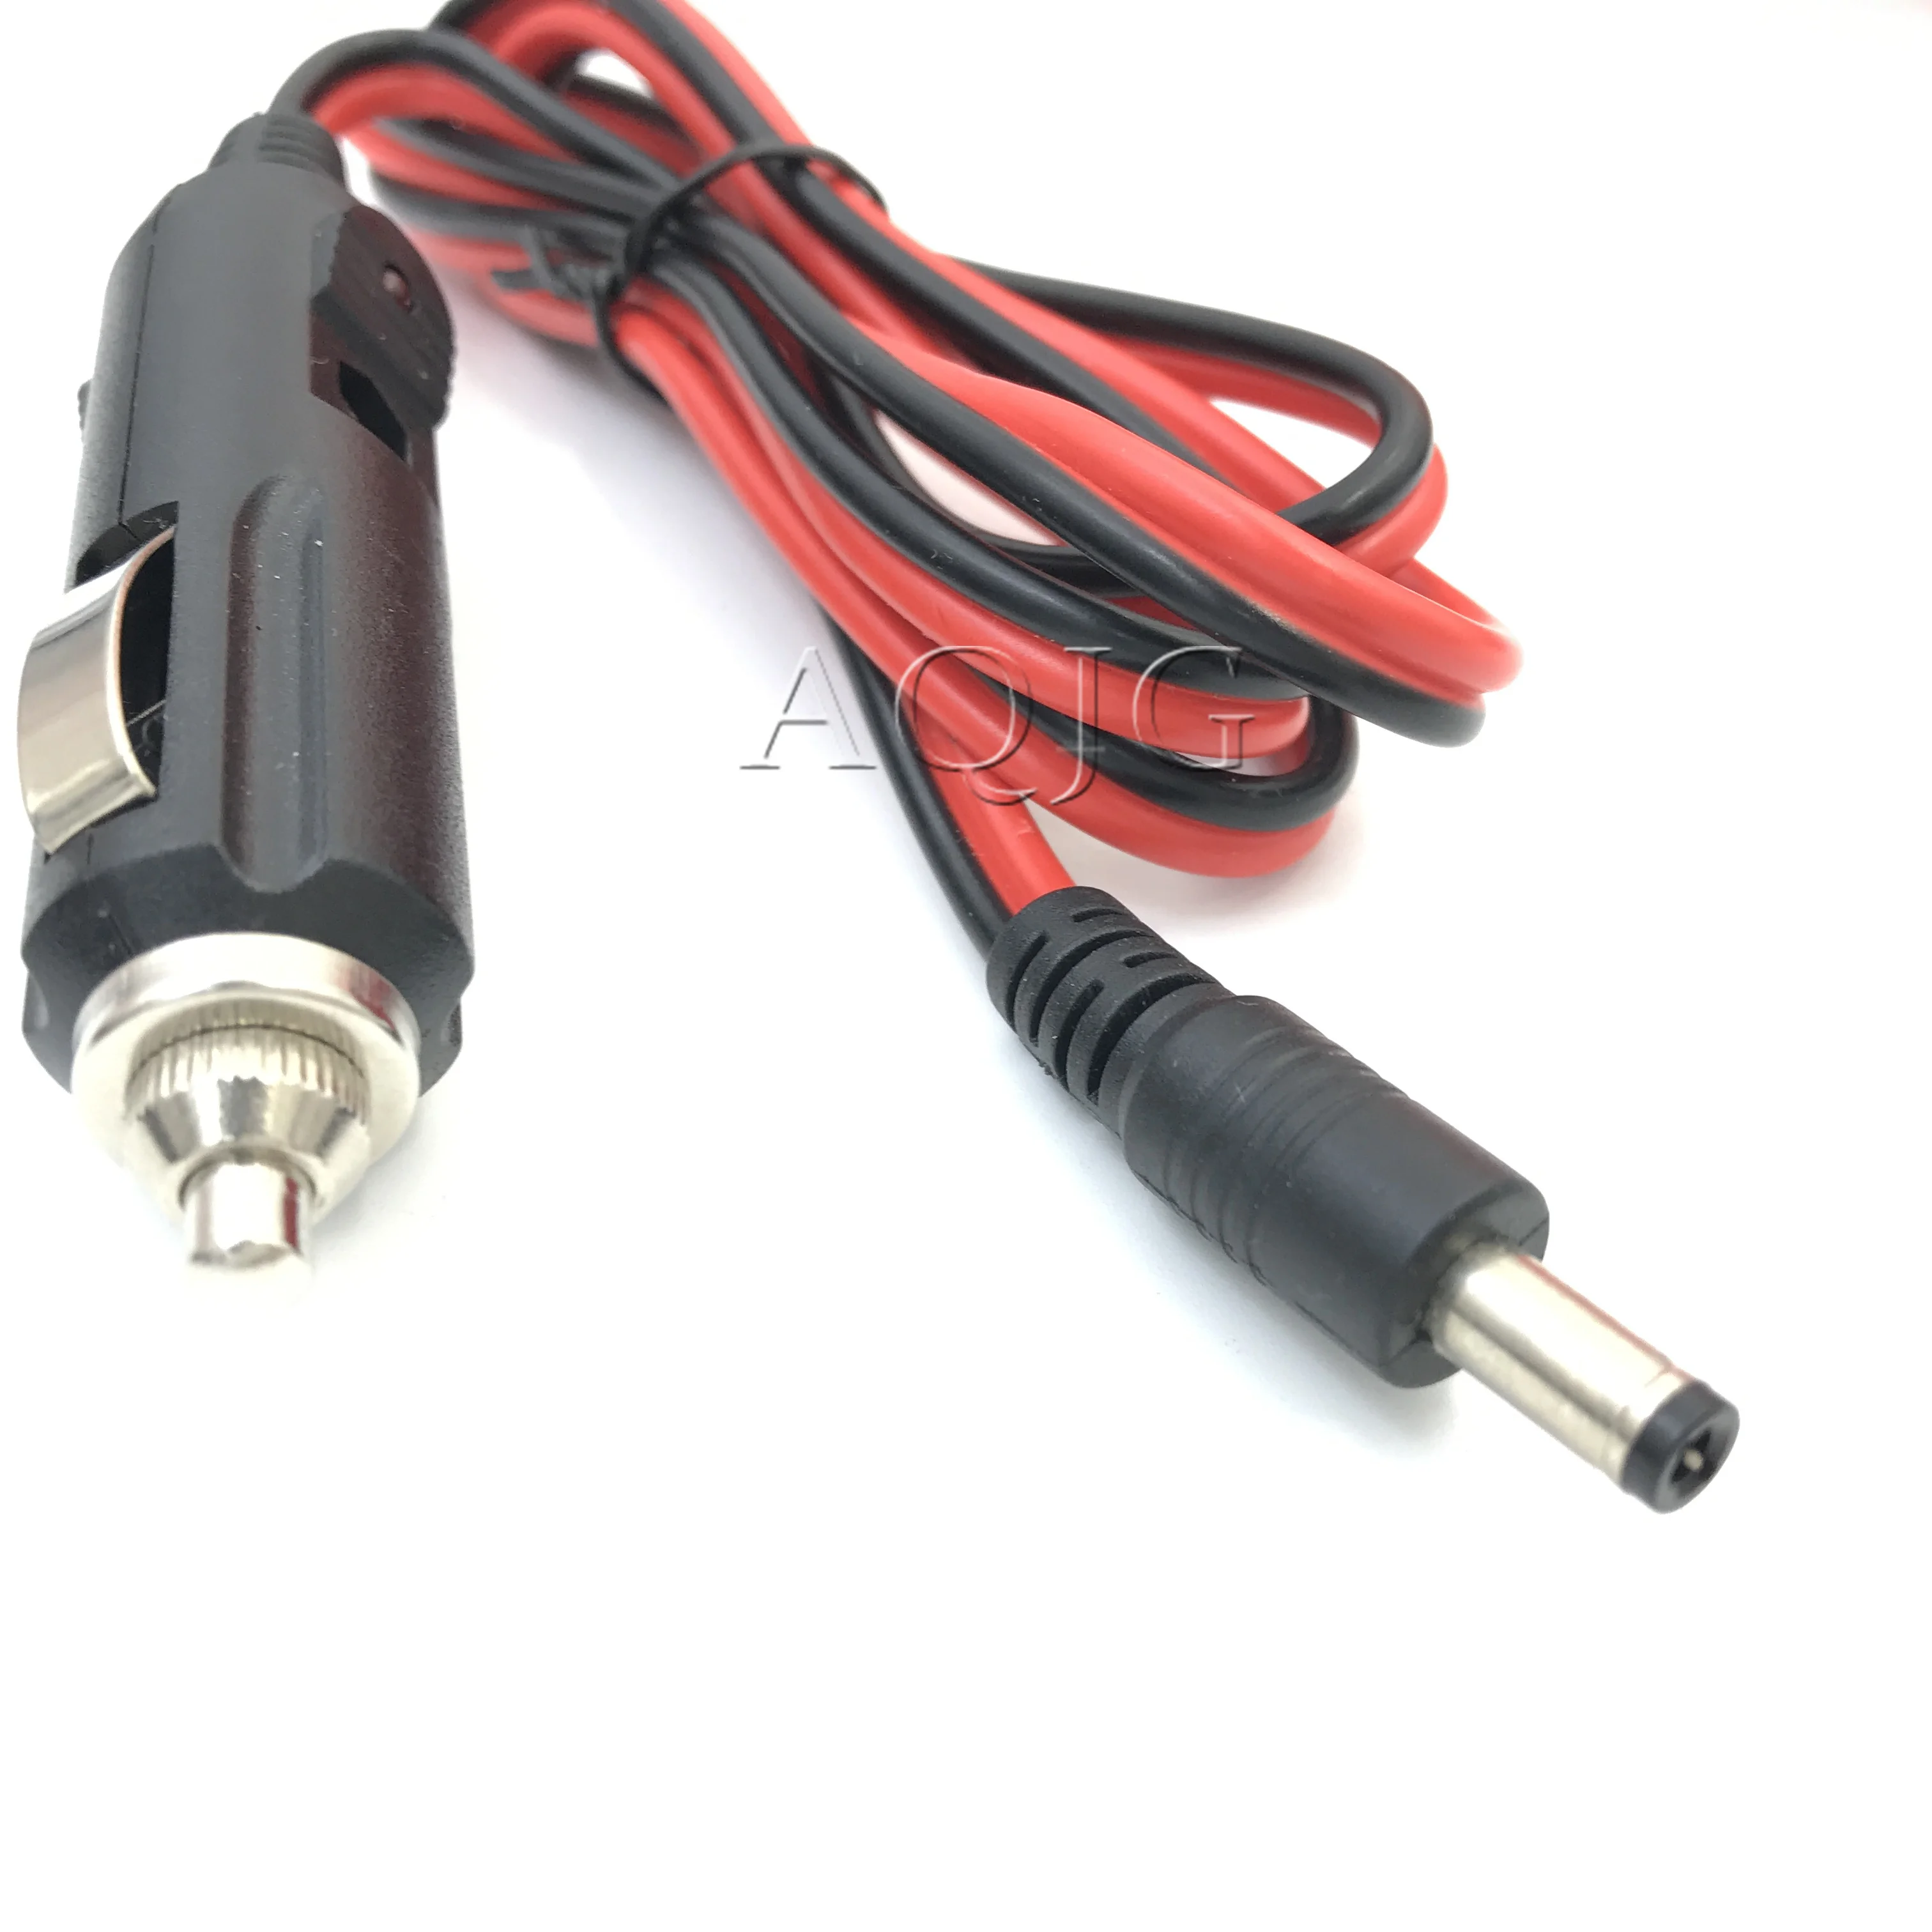 

New 12V 5A DC Car Cigarette Lighter Charger With Fuse, Universal Power Adapter DC Plug 5.5x2.1mm Cable 1.2m